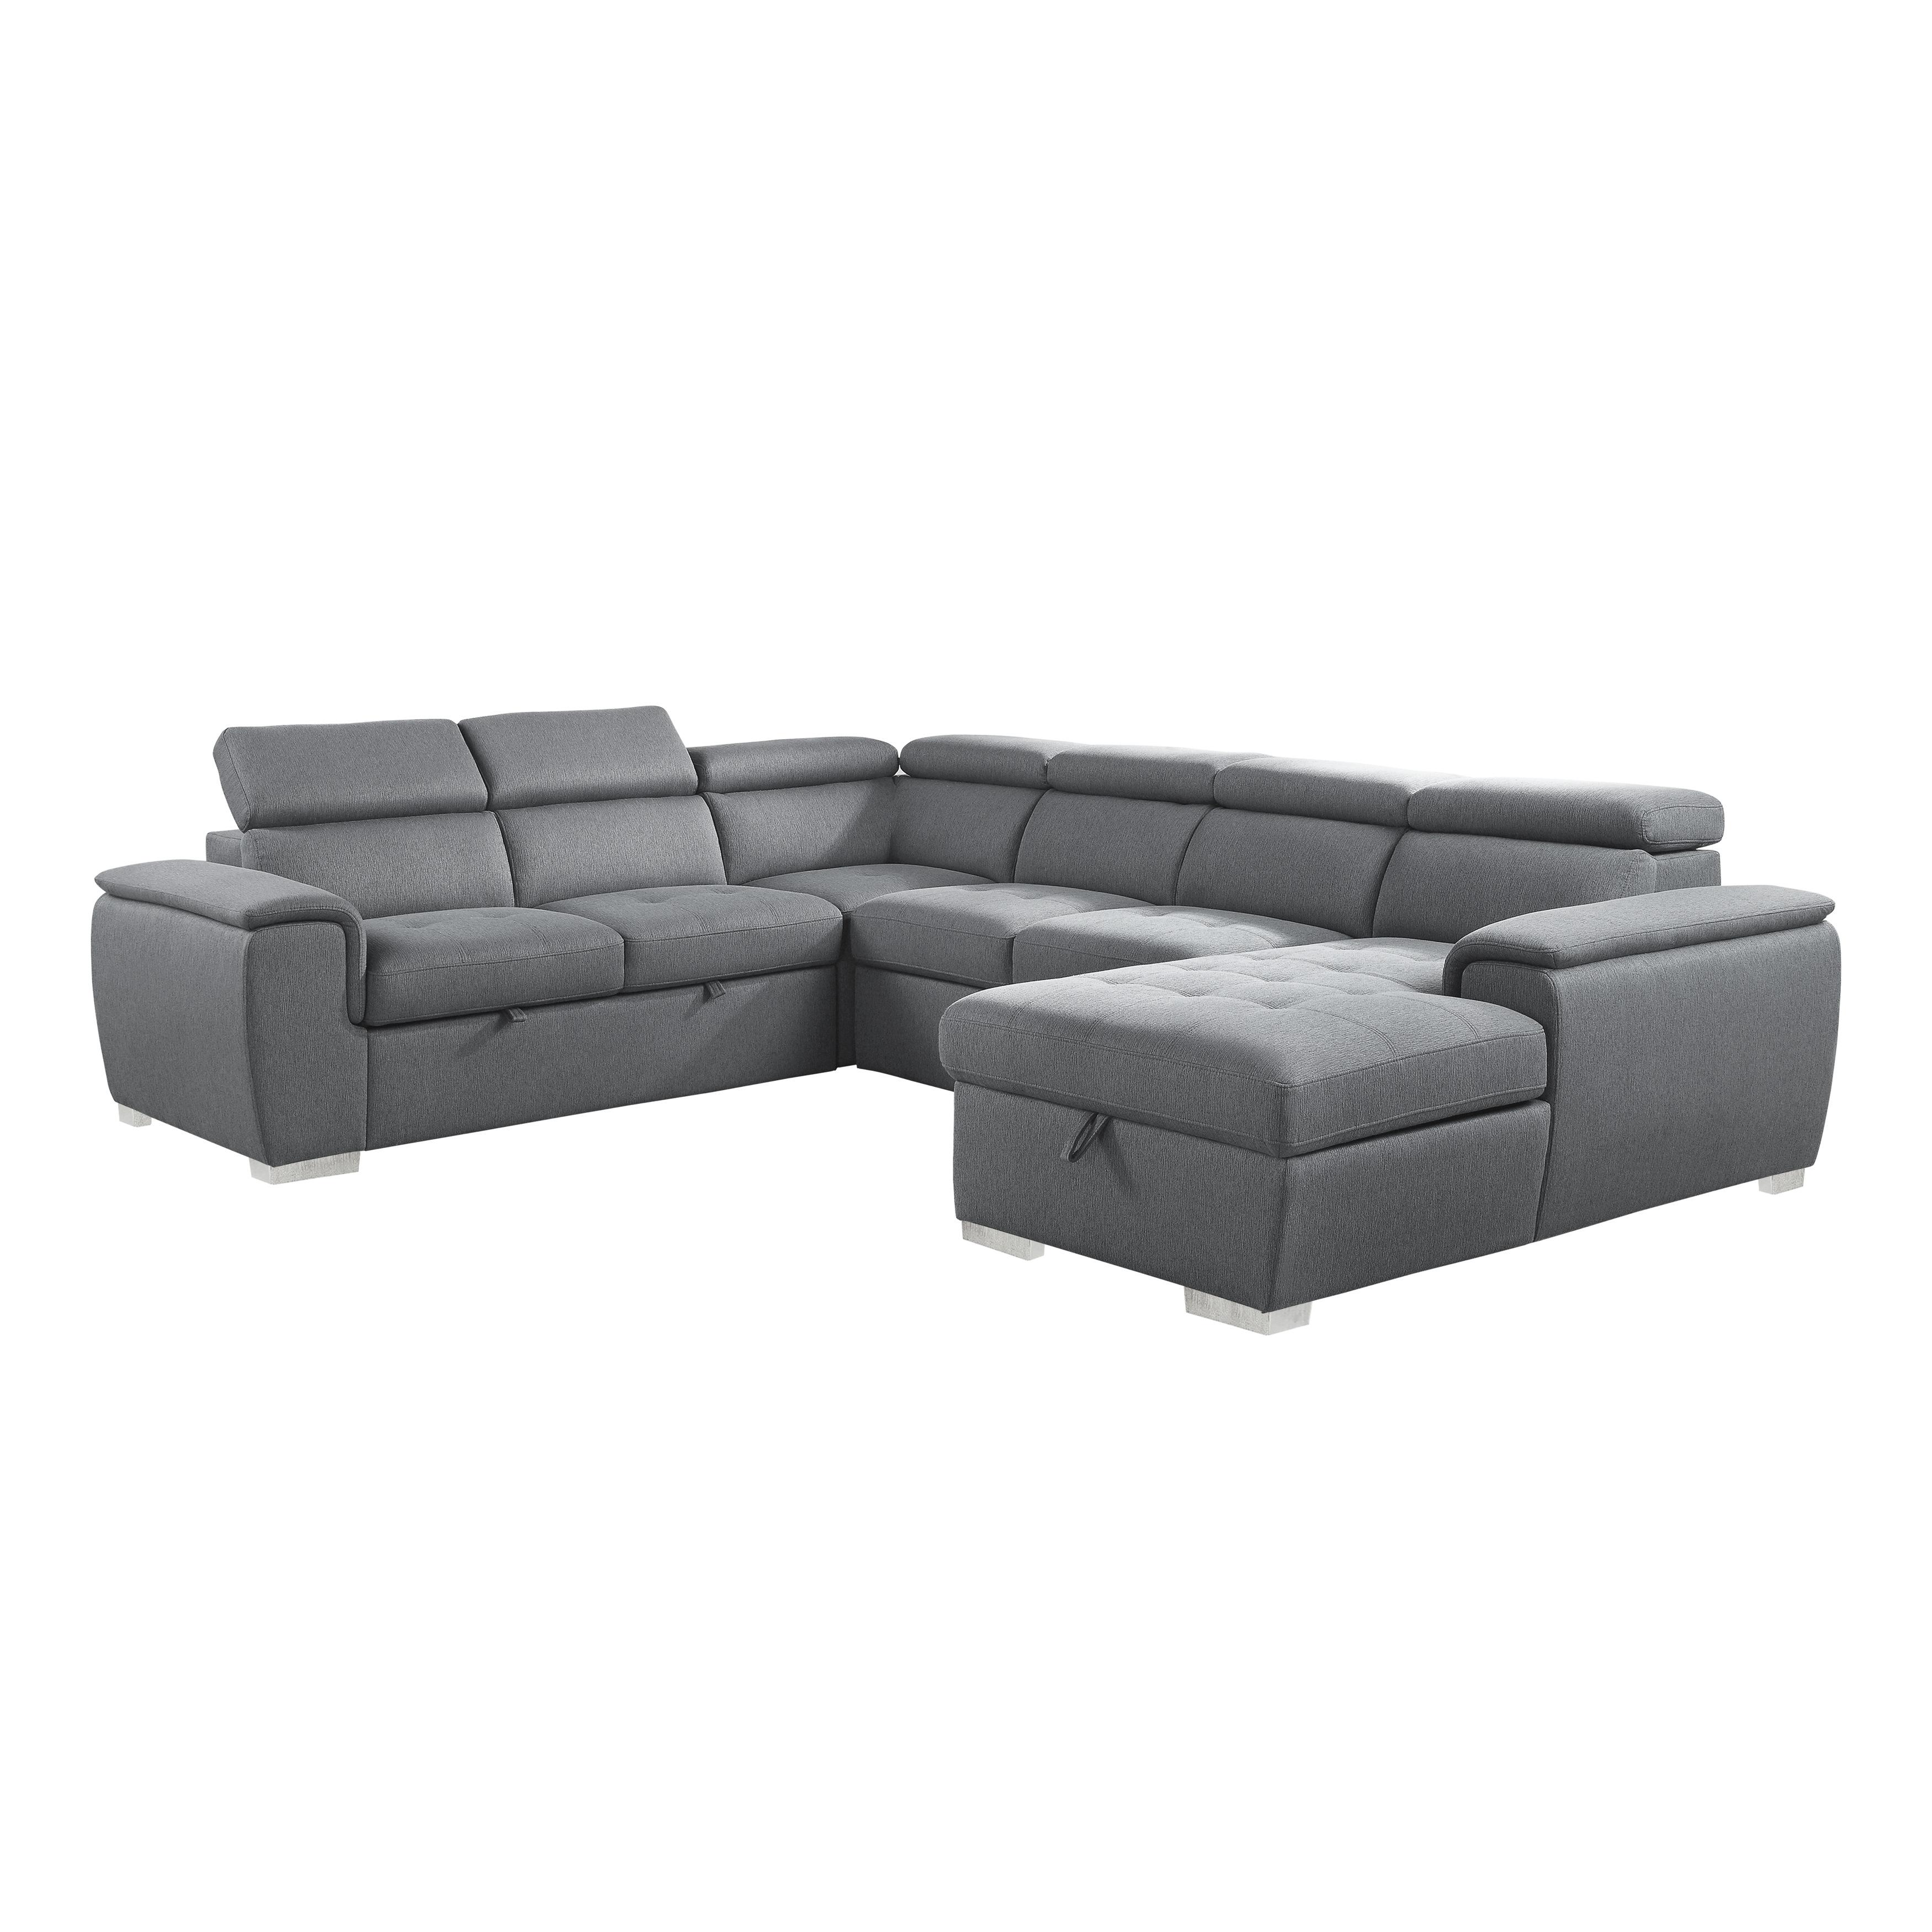 

    
Contemporary Gray Chenille 4-Piece Sectional Homelegance 9355GY*42LRC Berel
